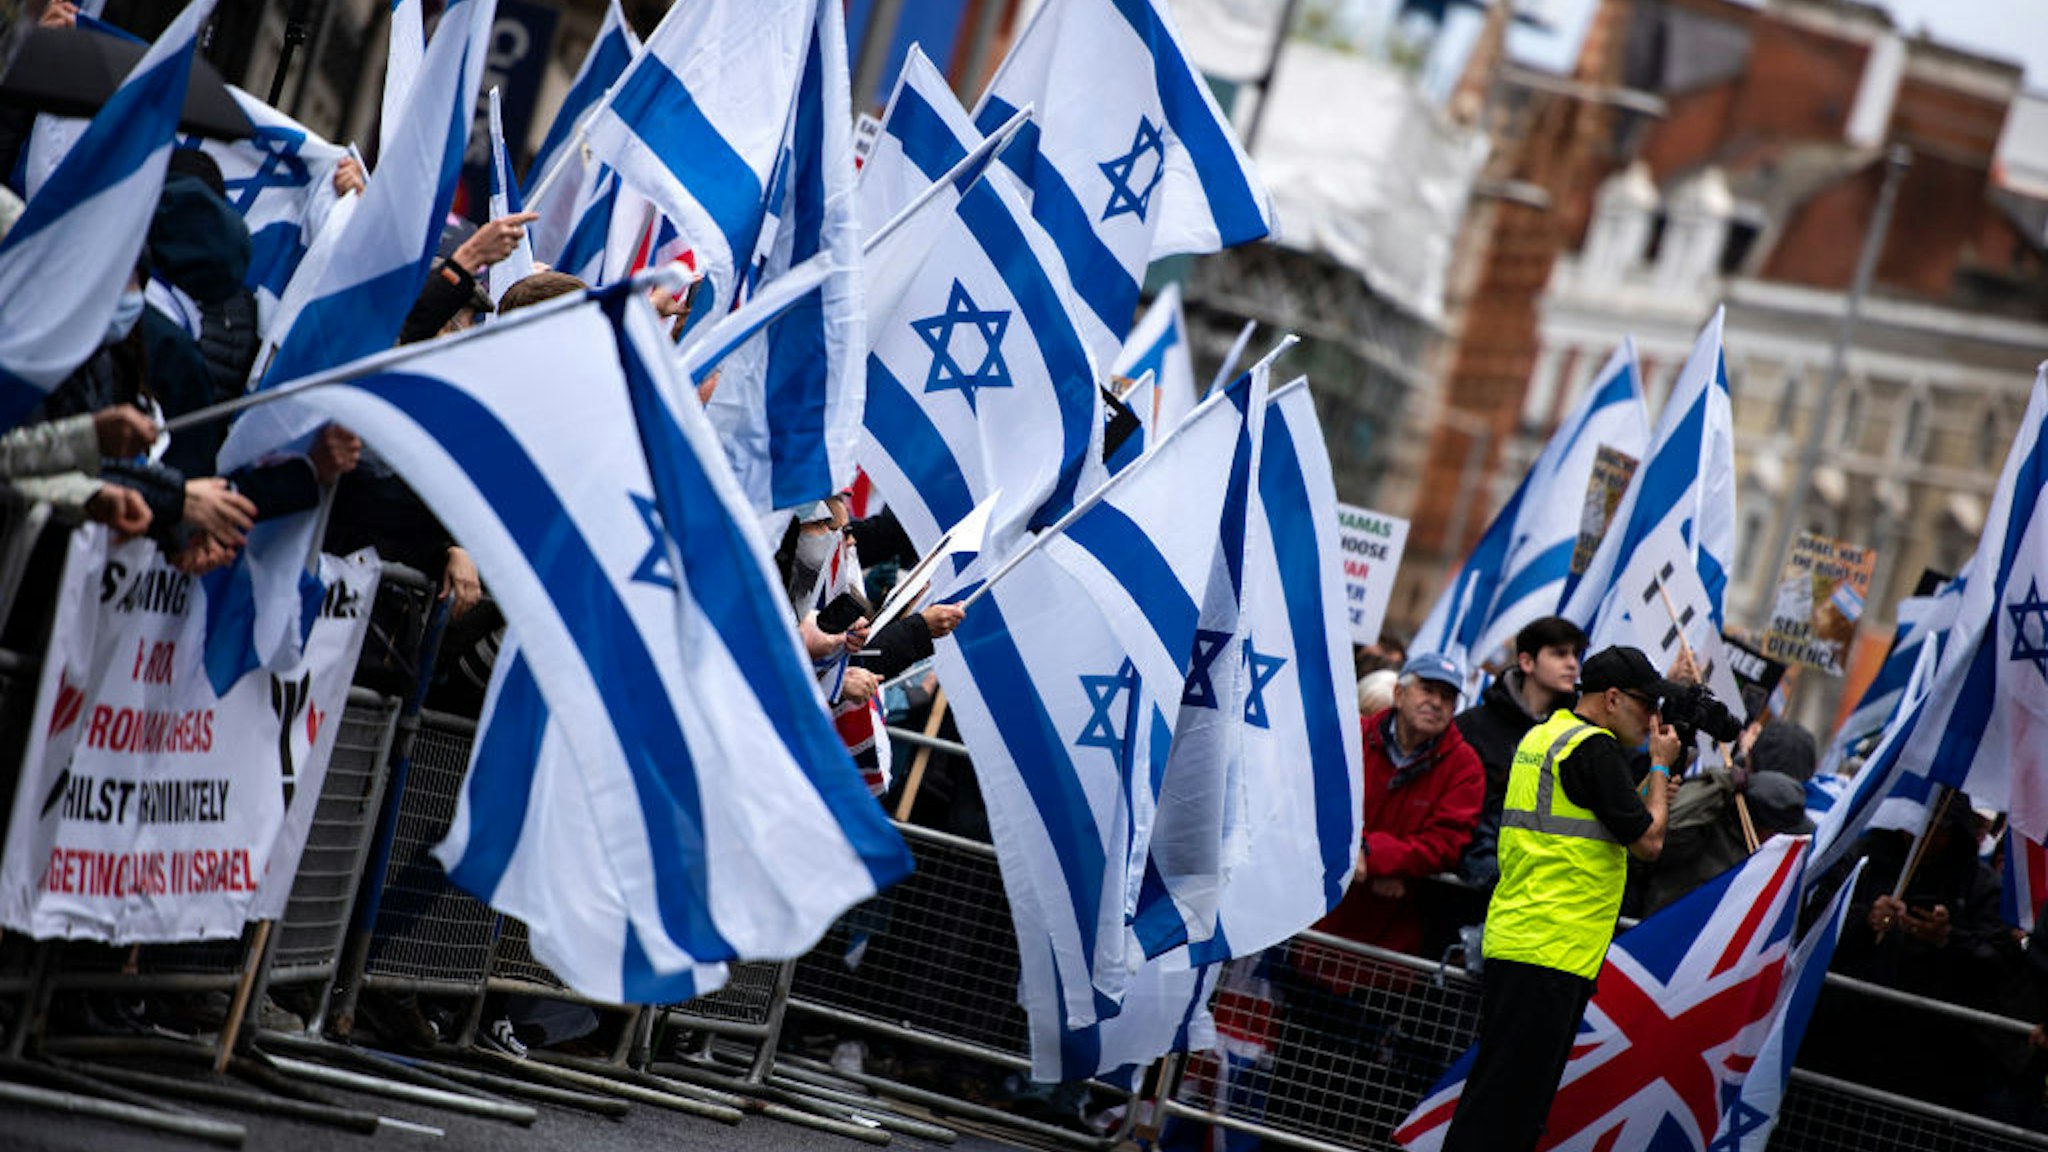 LONDON, UNITED KINGDOM - 2021/05/23: Protesters wave Israeli flags at the Israeli Embassy on High Street Kensington during the demonstration. A pro Israeli demonstration held around Embassy of Israel in solidarity with Israel after cease-fire agreement between Israel and Hamas on May 21, 2021 in Gaza City.